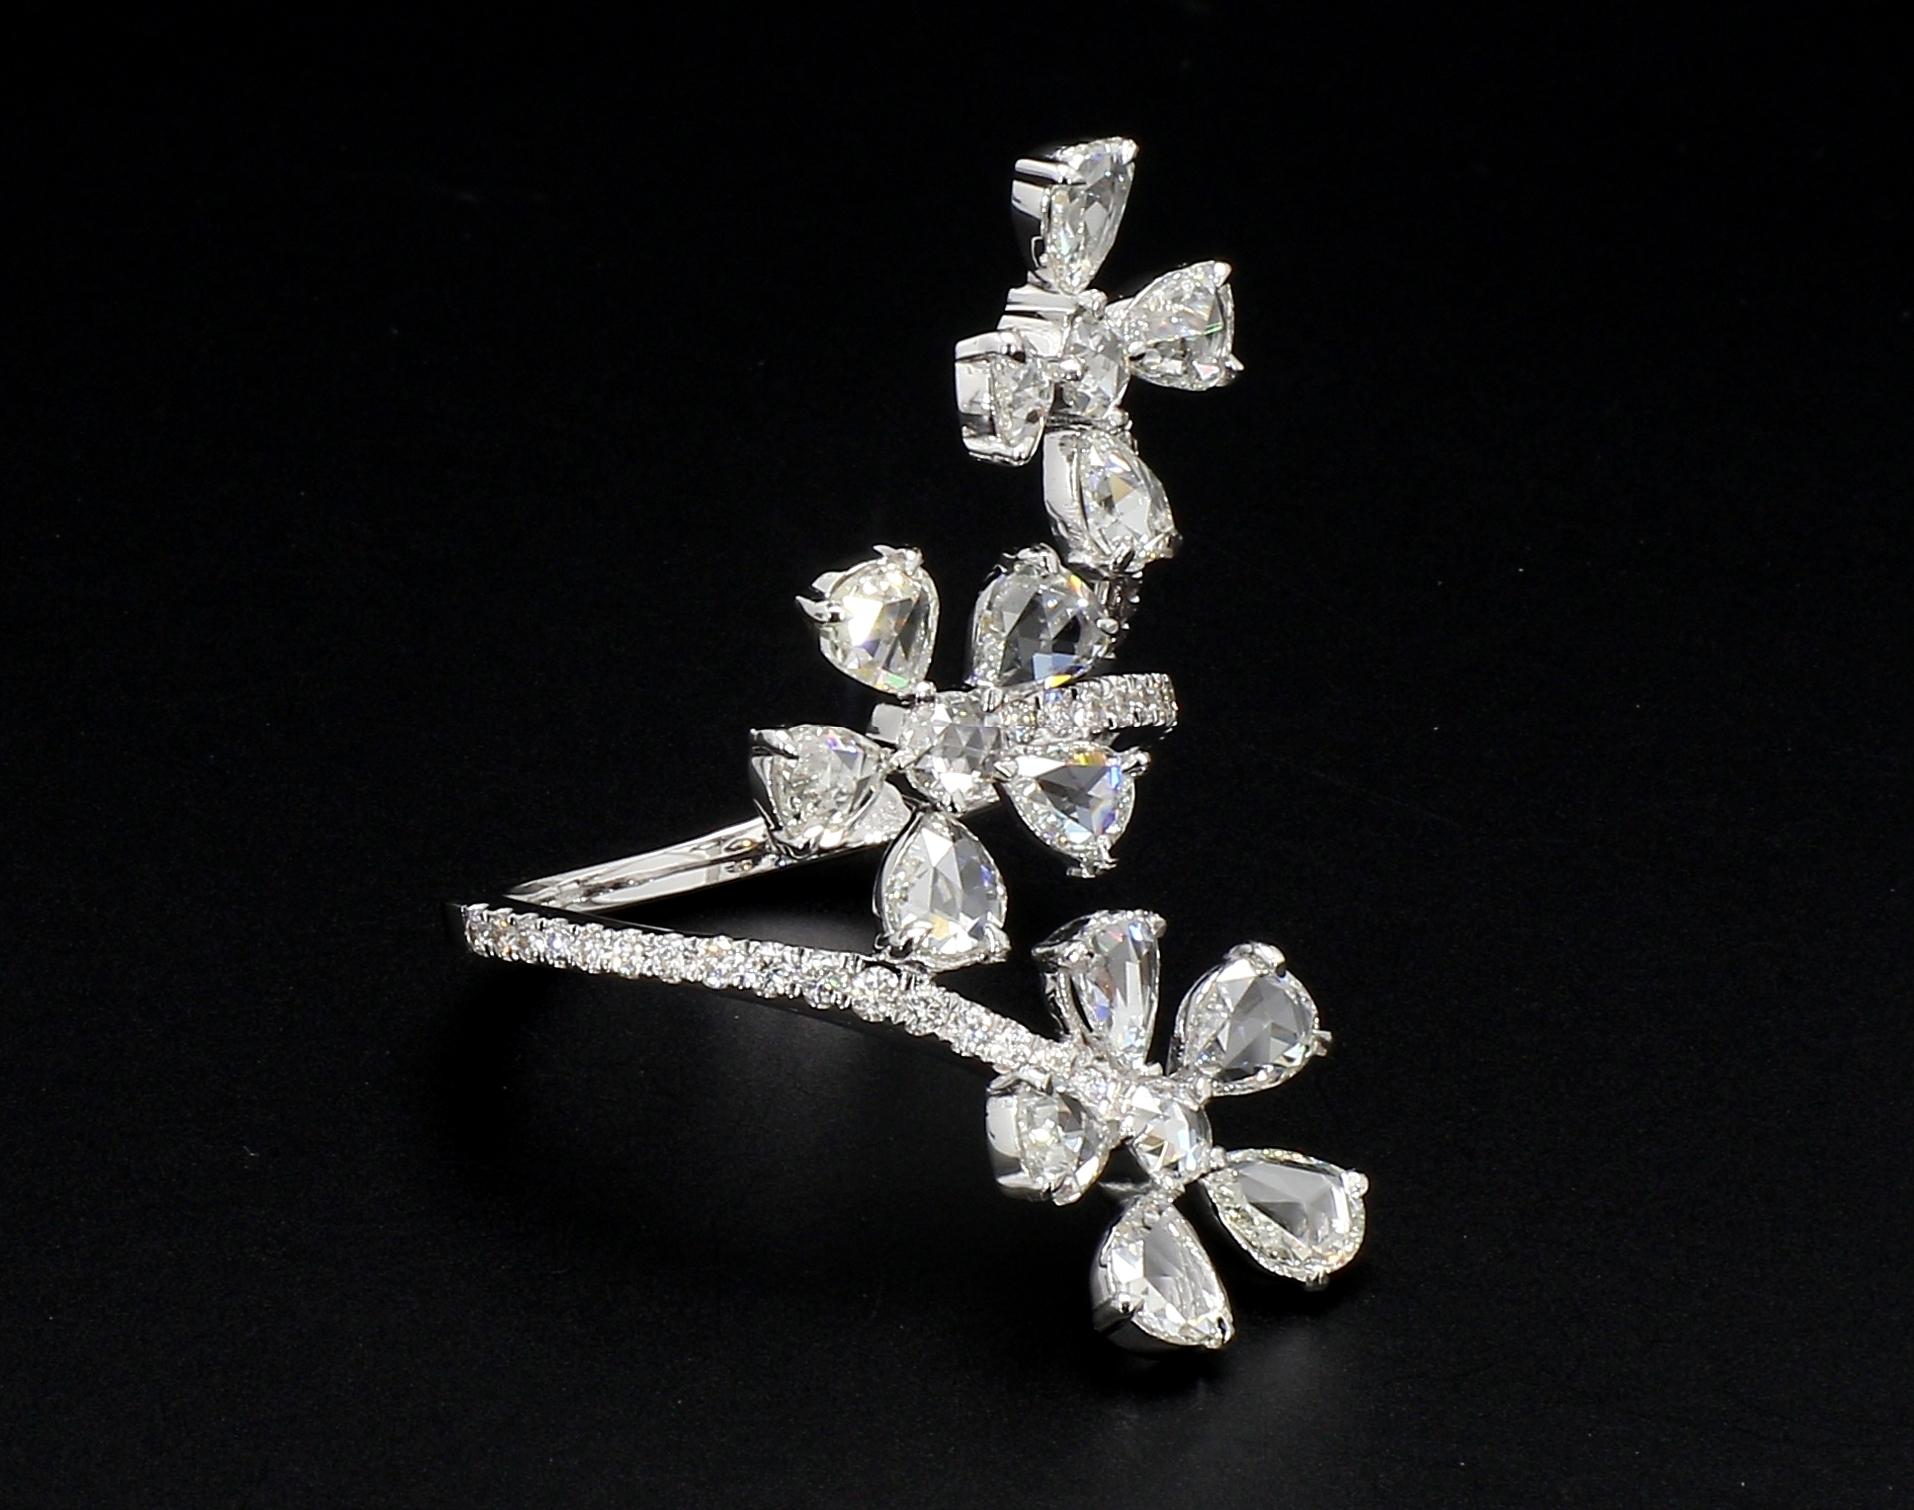 PANIM Trio Floral Ring with Diamond Rosecut in 18 Karat White Gold In New Condition For Sale In Tsim Sha Tsui, Hong Kong